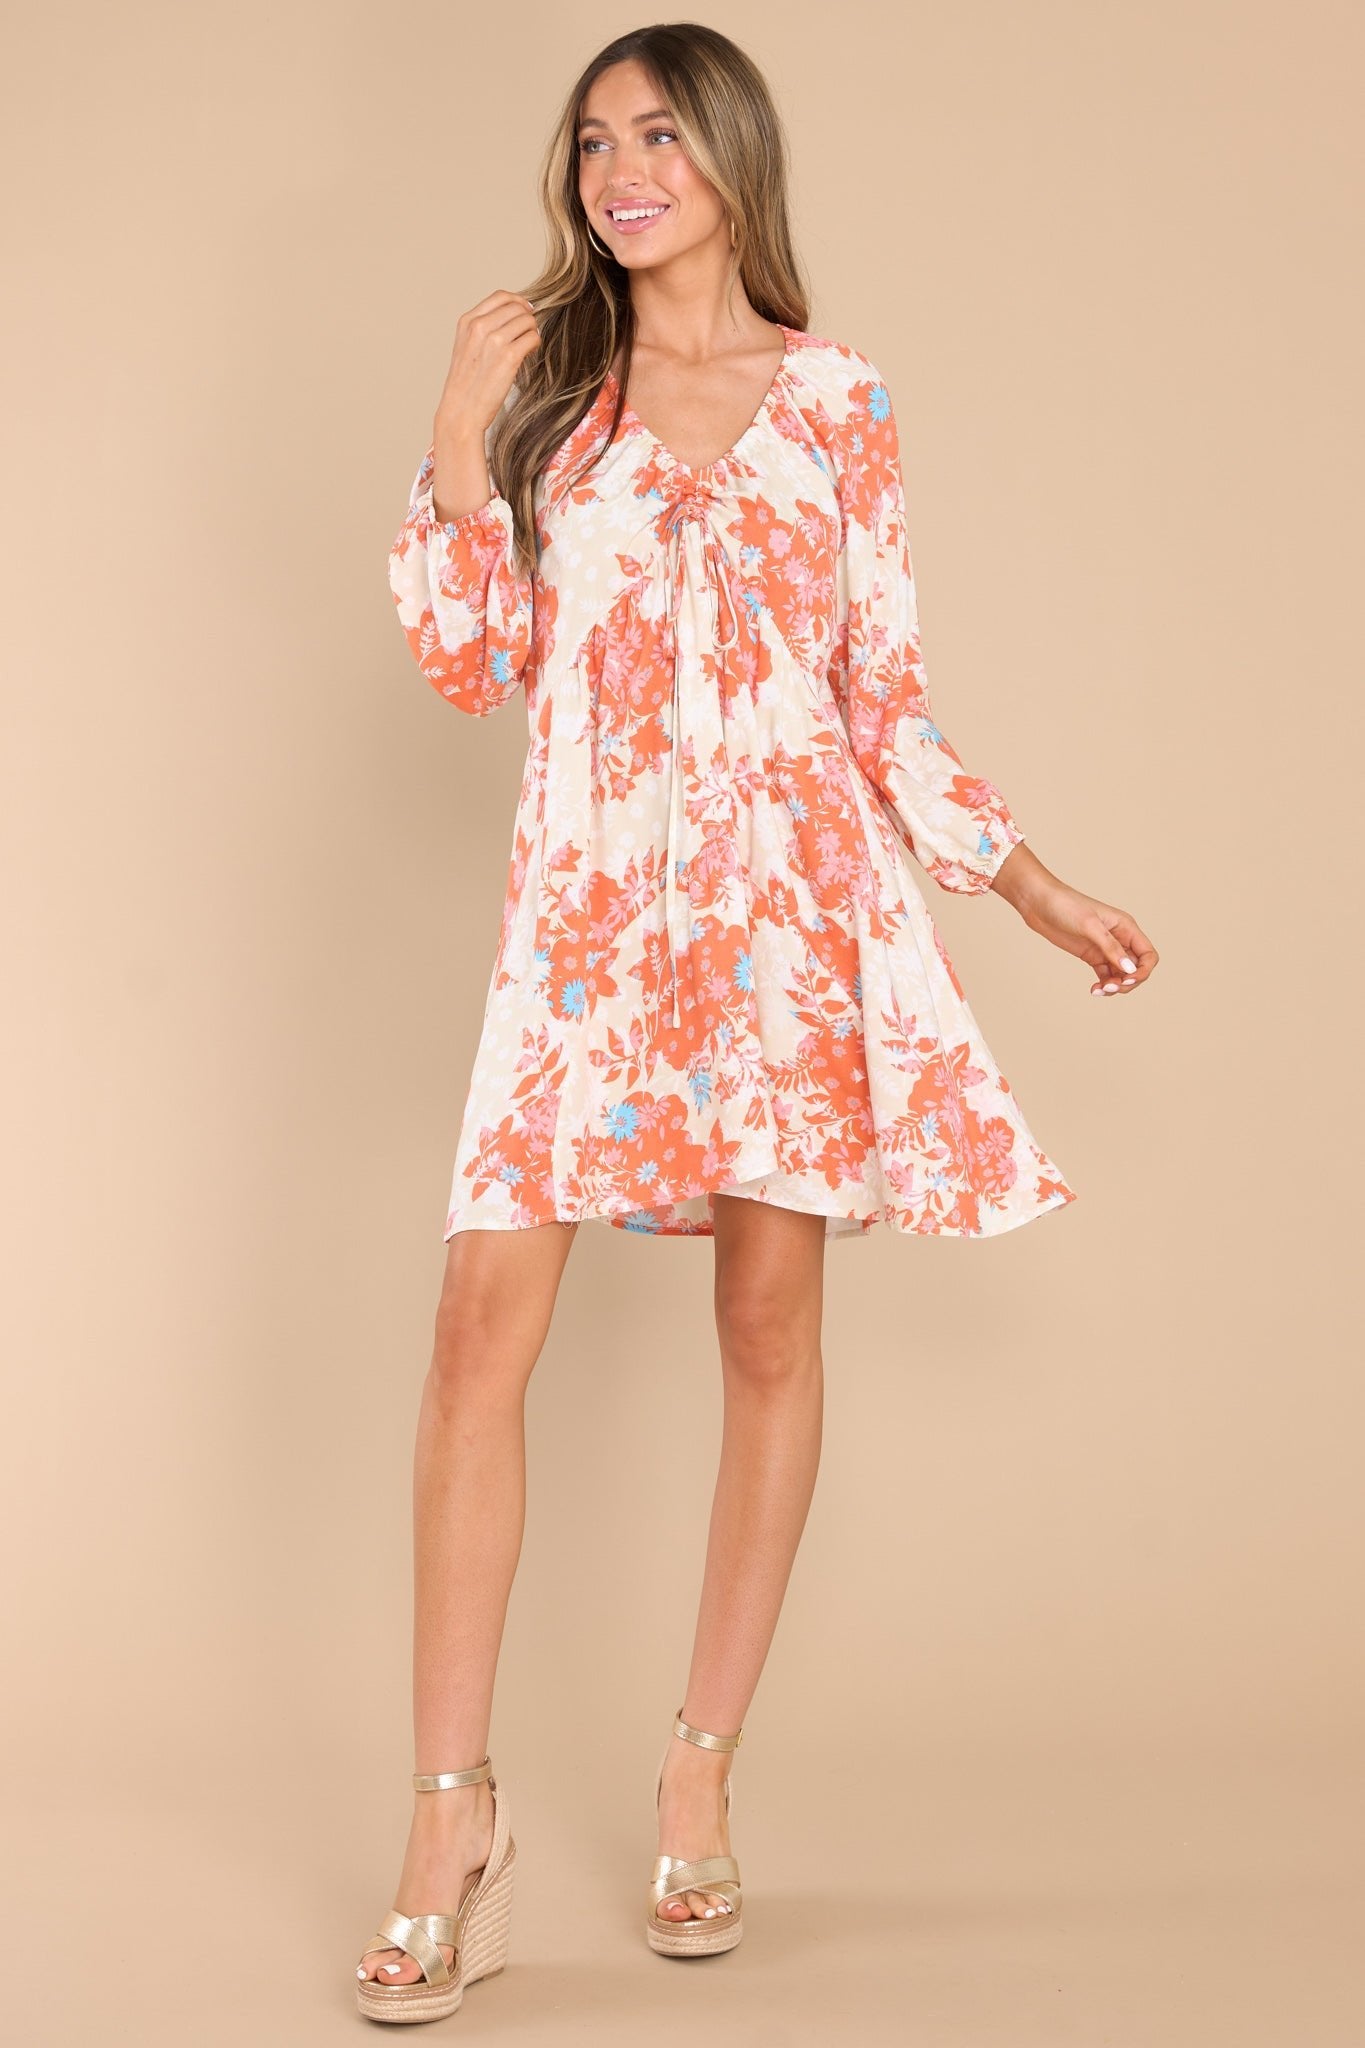 Taking My Own Advice Taupe Floral Dress - Red Dress